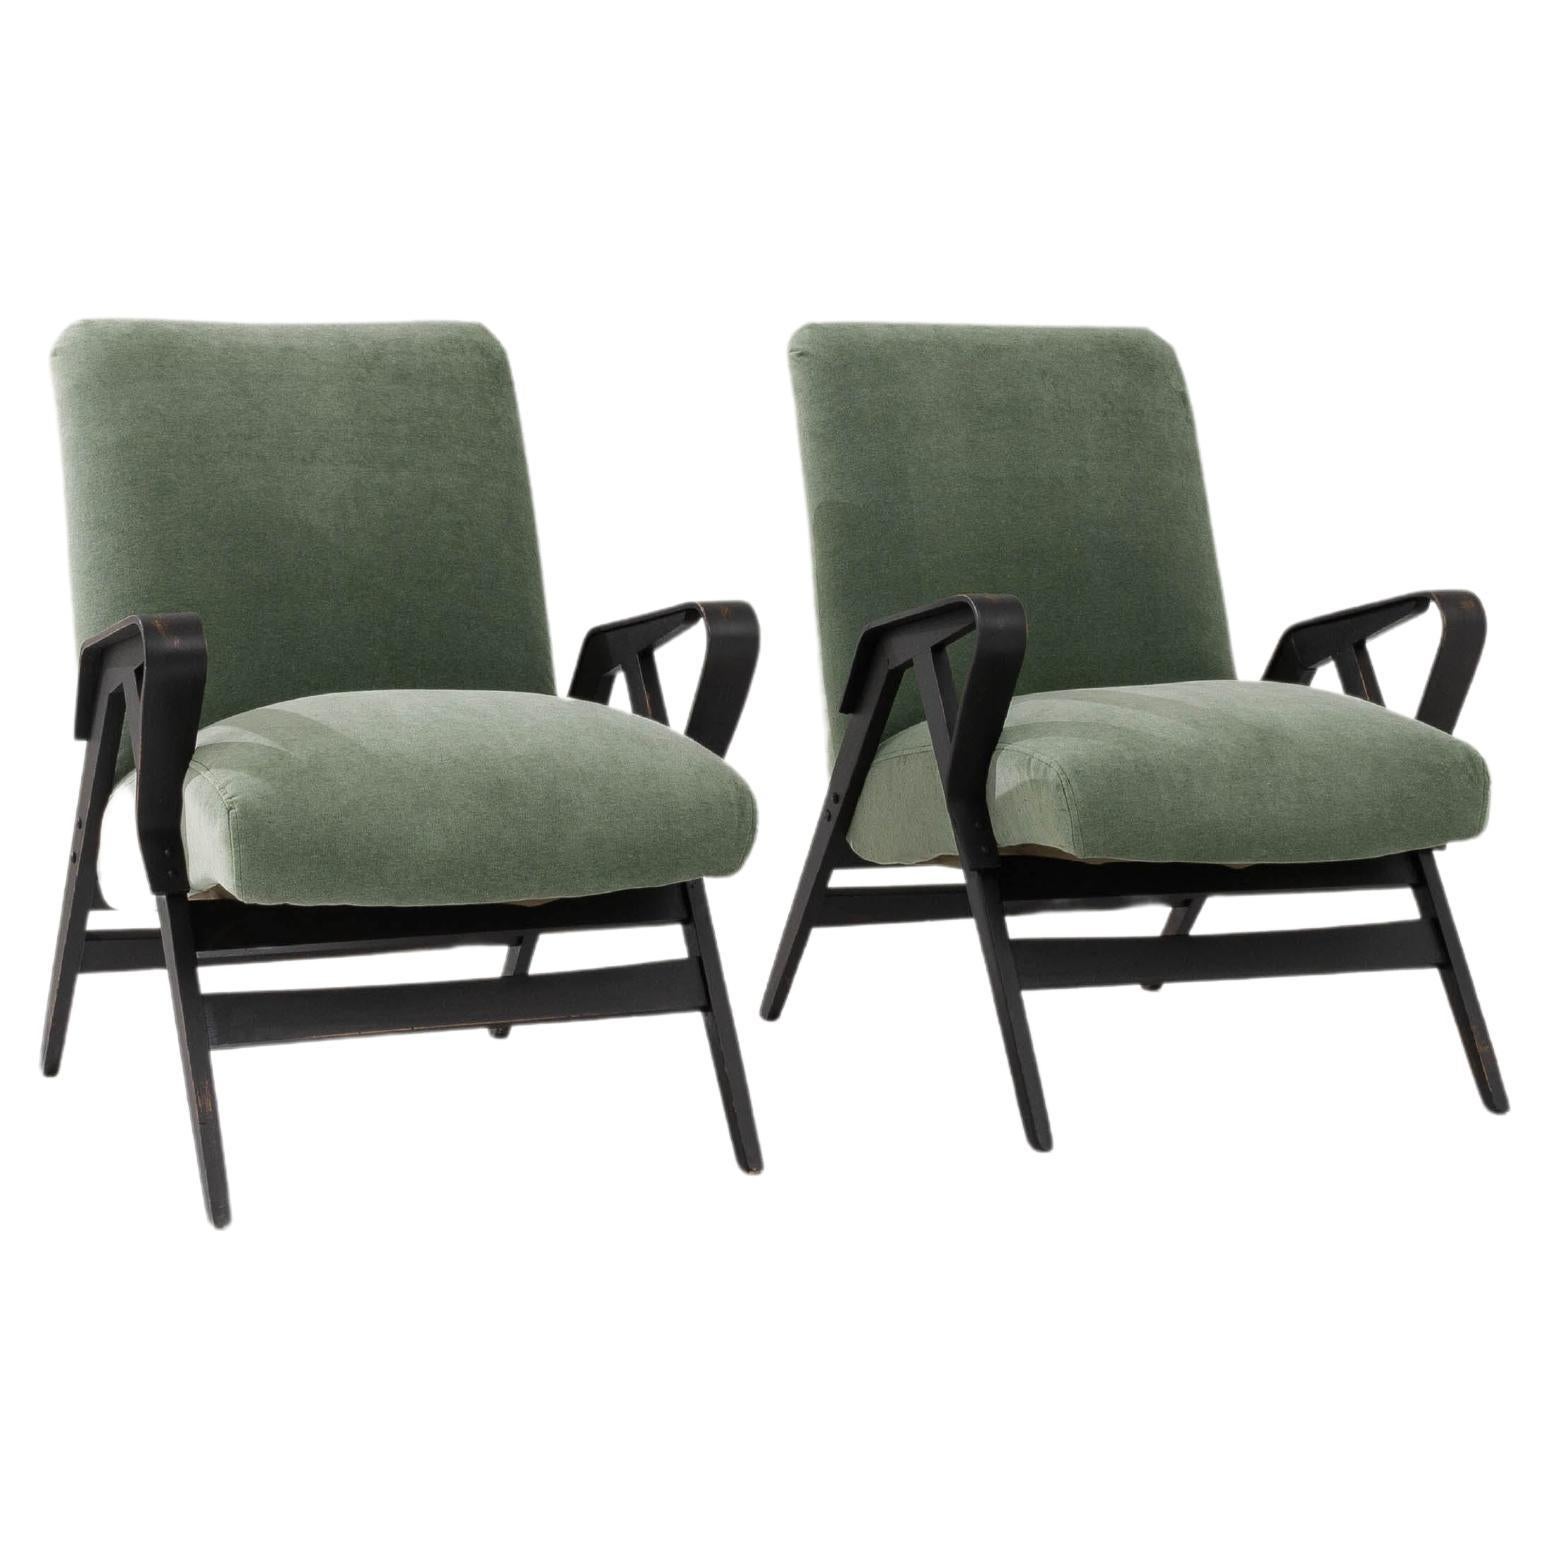 1960s Czech Upholstered Armchairs By Tatra, a Pair 